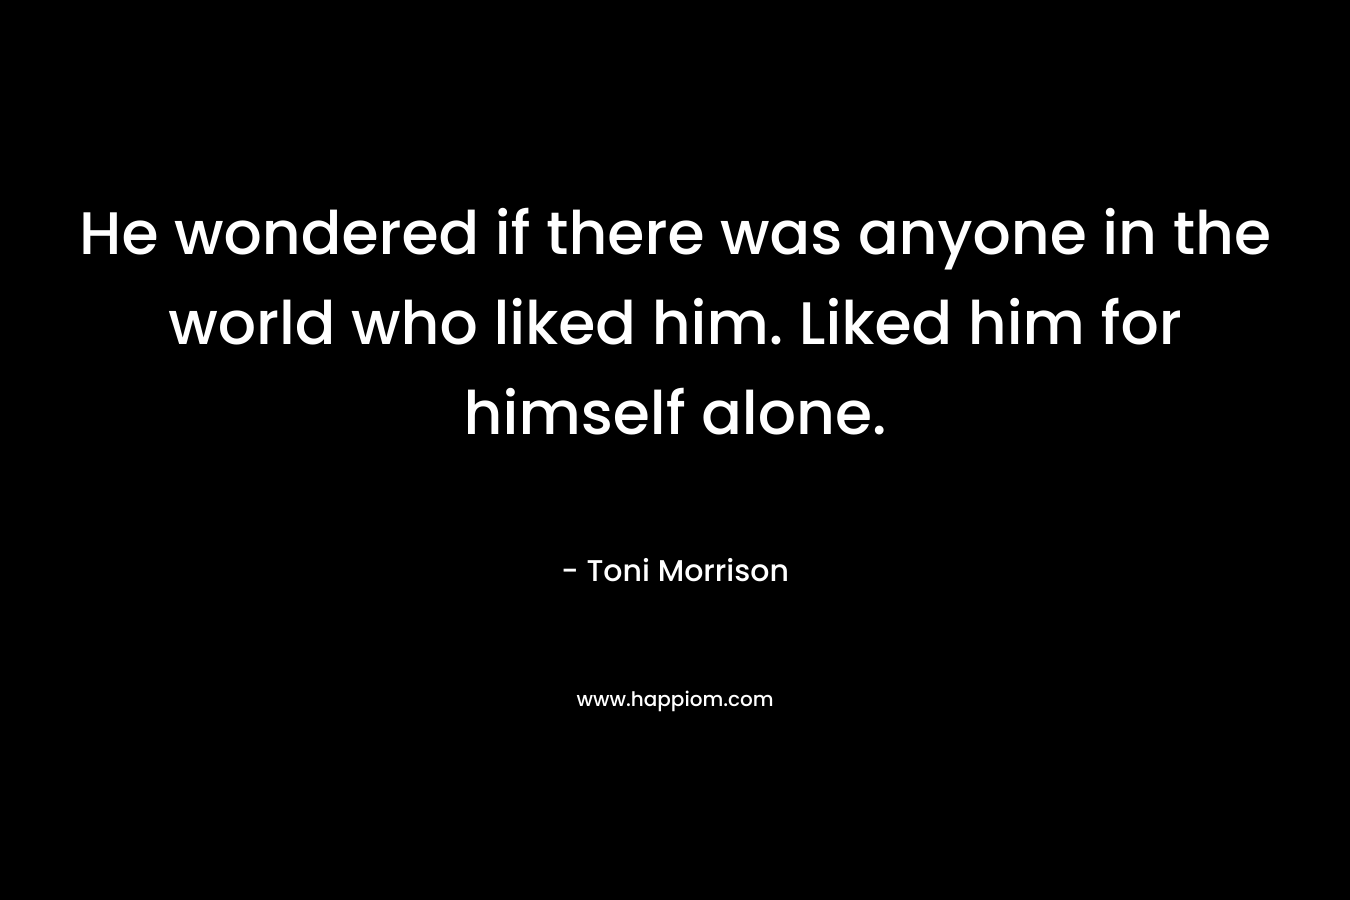 He wondered if there was anyone in the world who liked him. Liked him for himself alone.